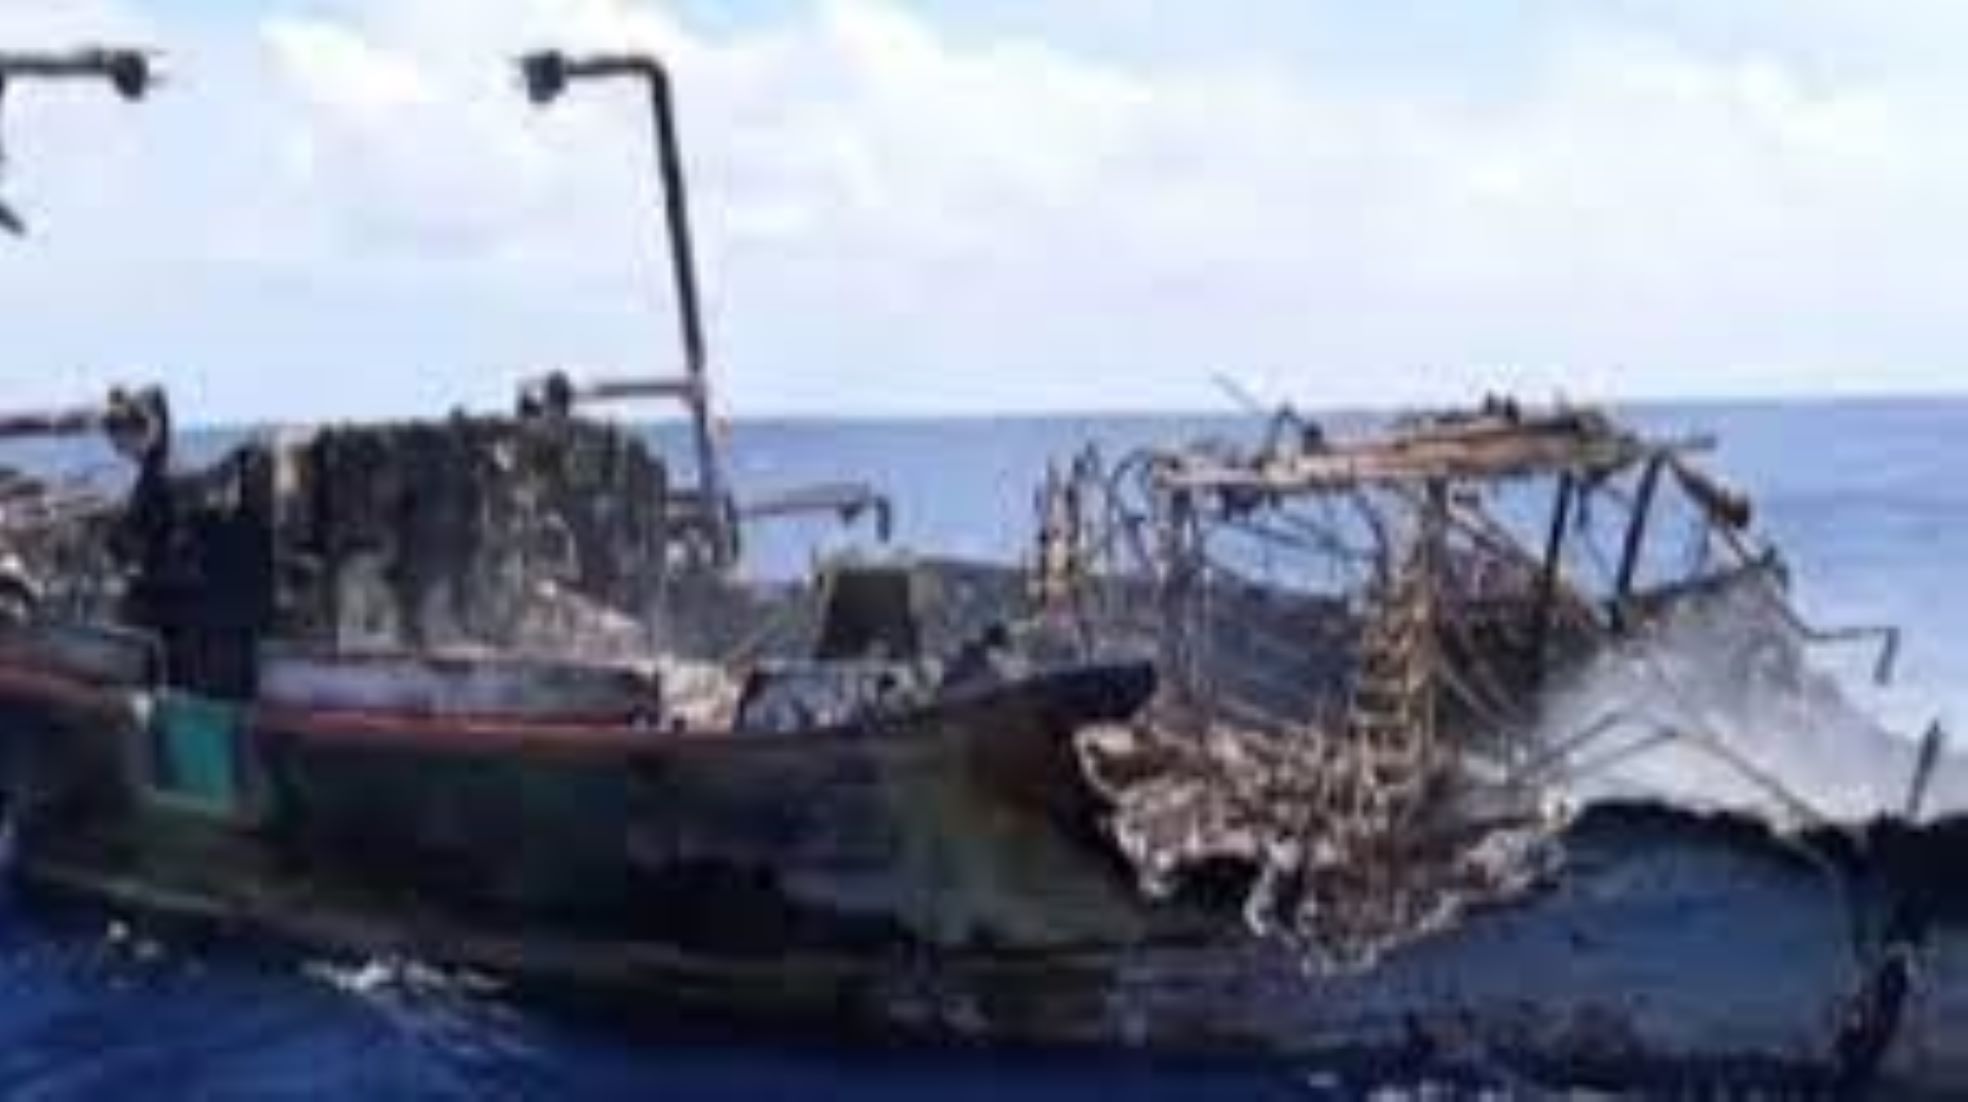 11 Indonesian Sailors Missing After Ship Catches Fire In Indian Ocean